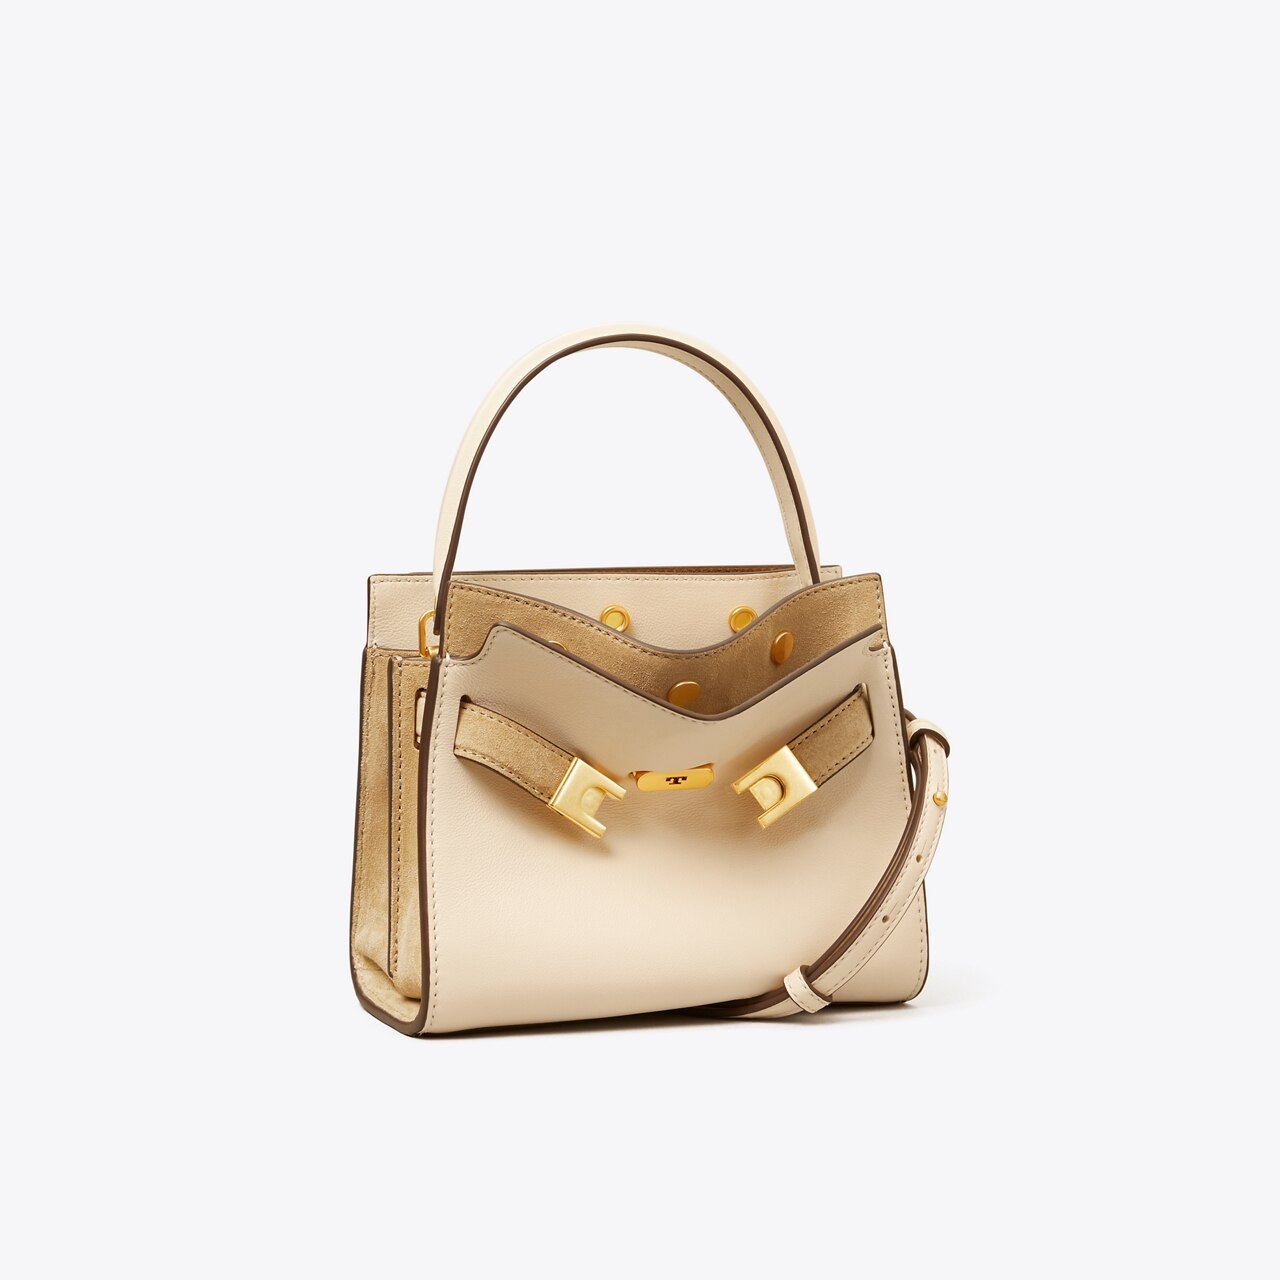 tory burch lee radziwill double bag outfit